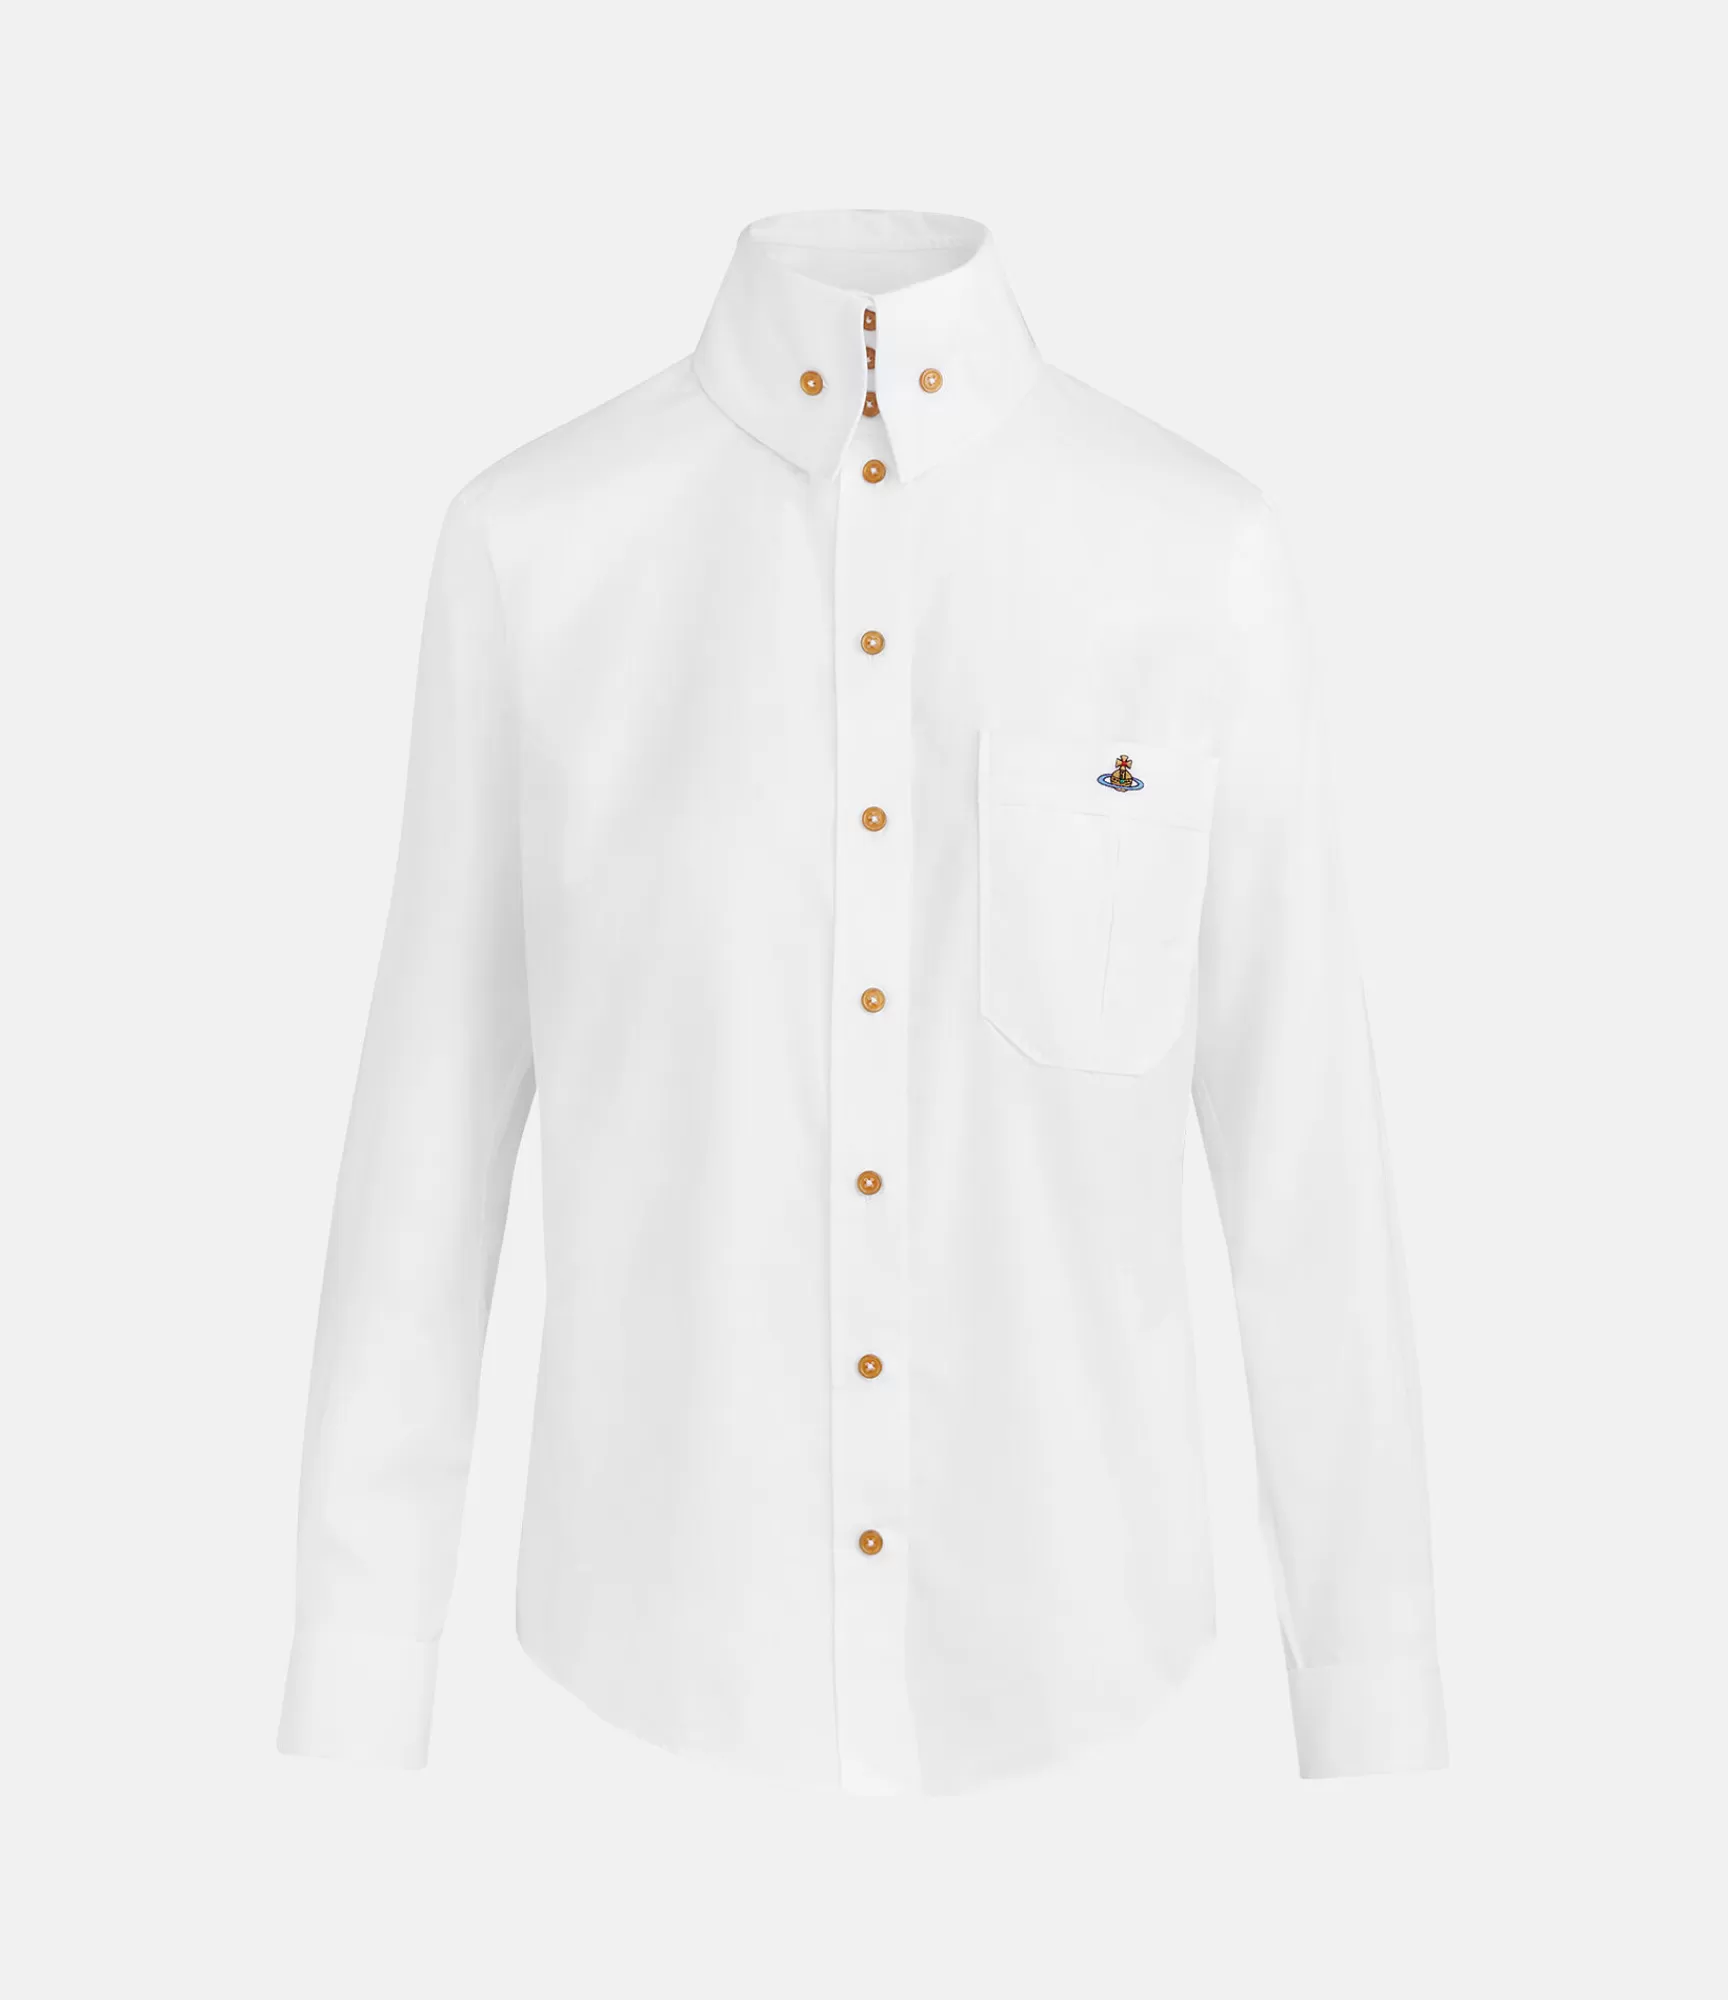 Vivienne Westwood Tops and Shirts*Classic krall shirt White